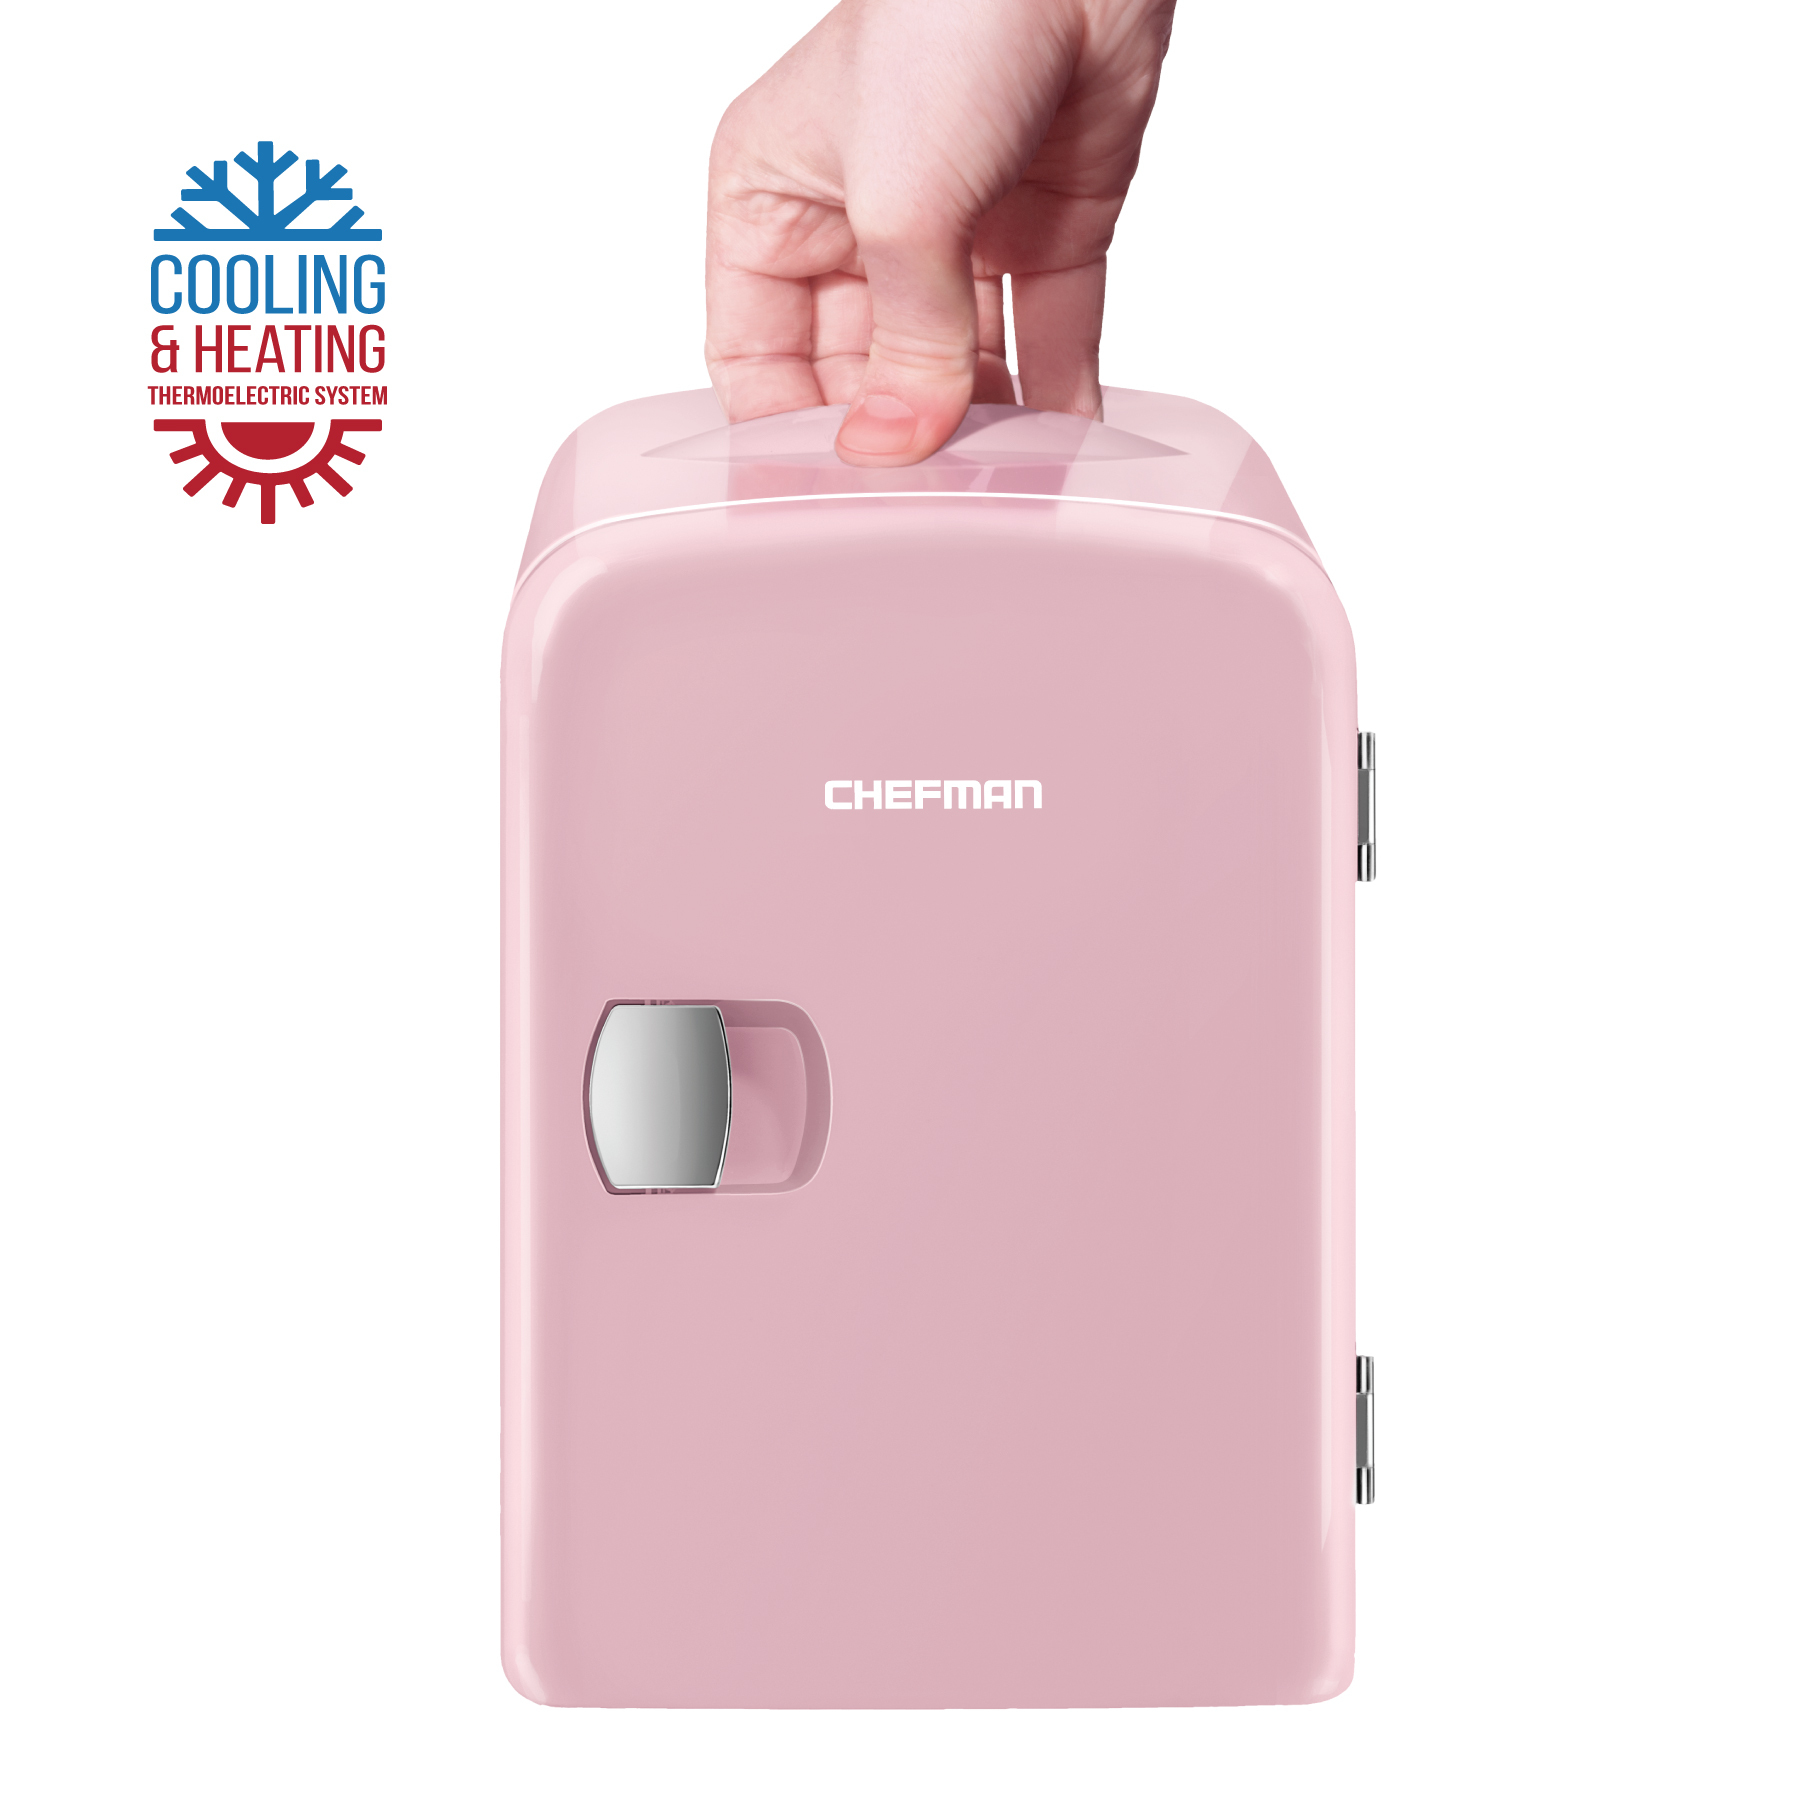 Chefman Portable 4L Mini Fridge w/ Heating and Cooling - Pink, New - image 3 of 5